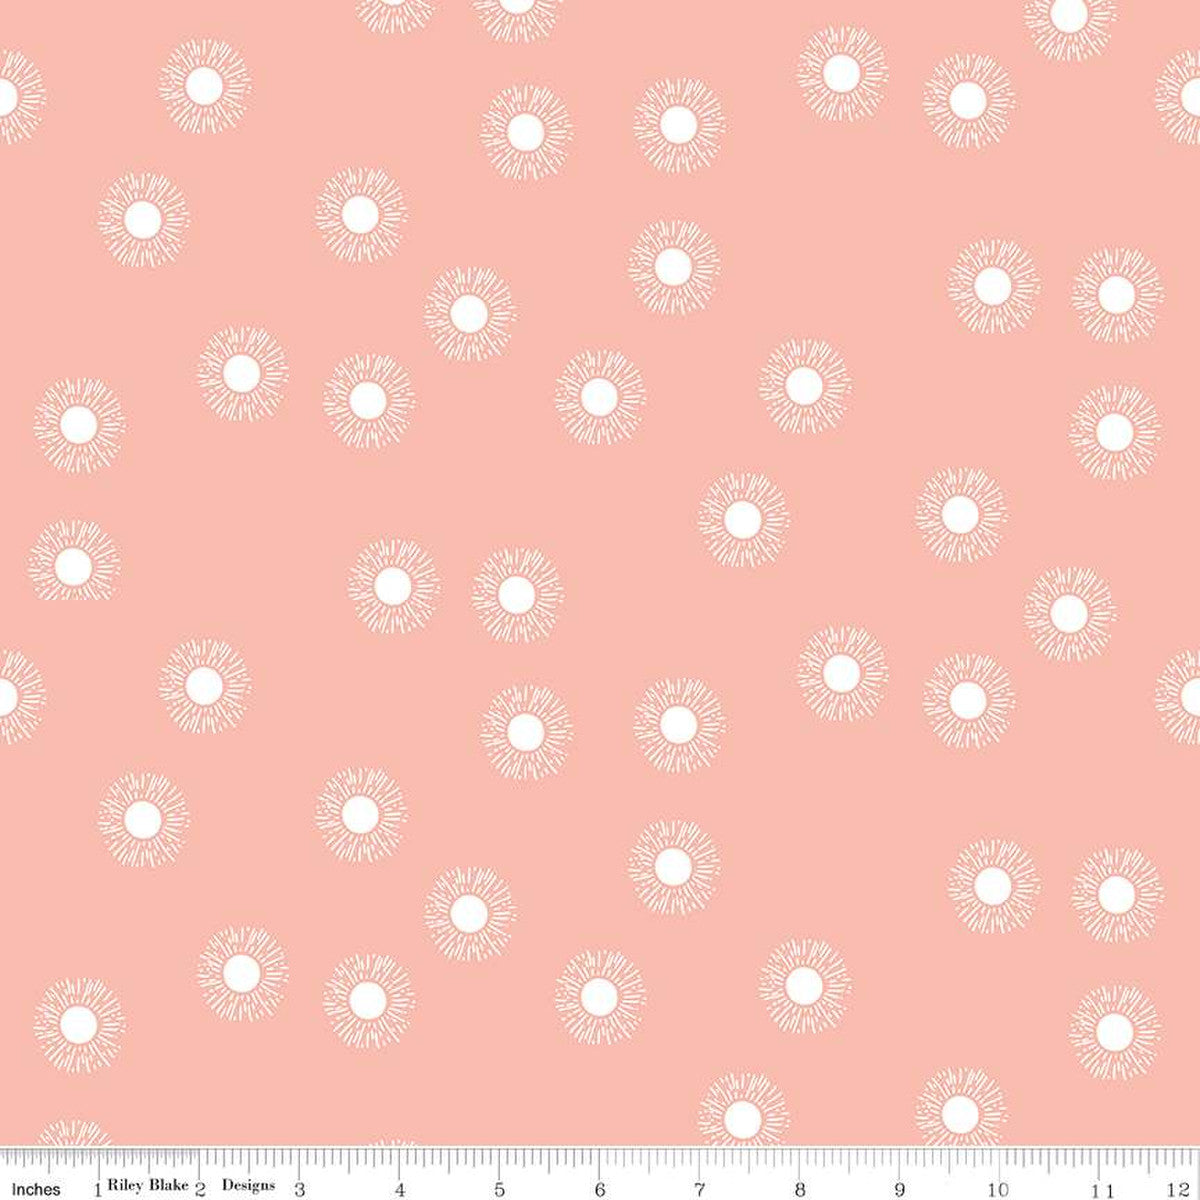 Manufacturer: Riley Blake Designs Designer: Fran Gulick of Cotton and Joy Collection: Moonchild Print Name: Sunrise in Crepe Material: 100% Cotton Weight: Quilting SKU: SC13824-CREPE Width: 44 inches